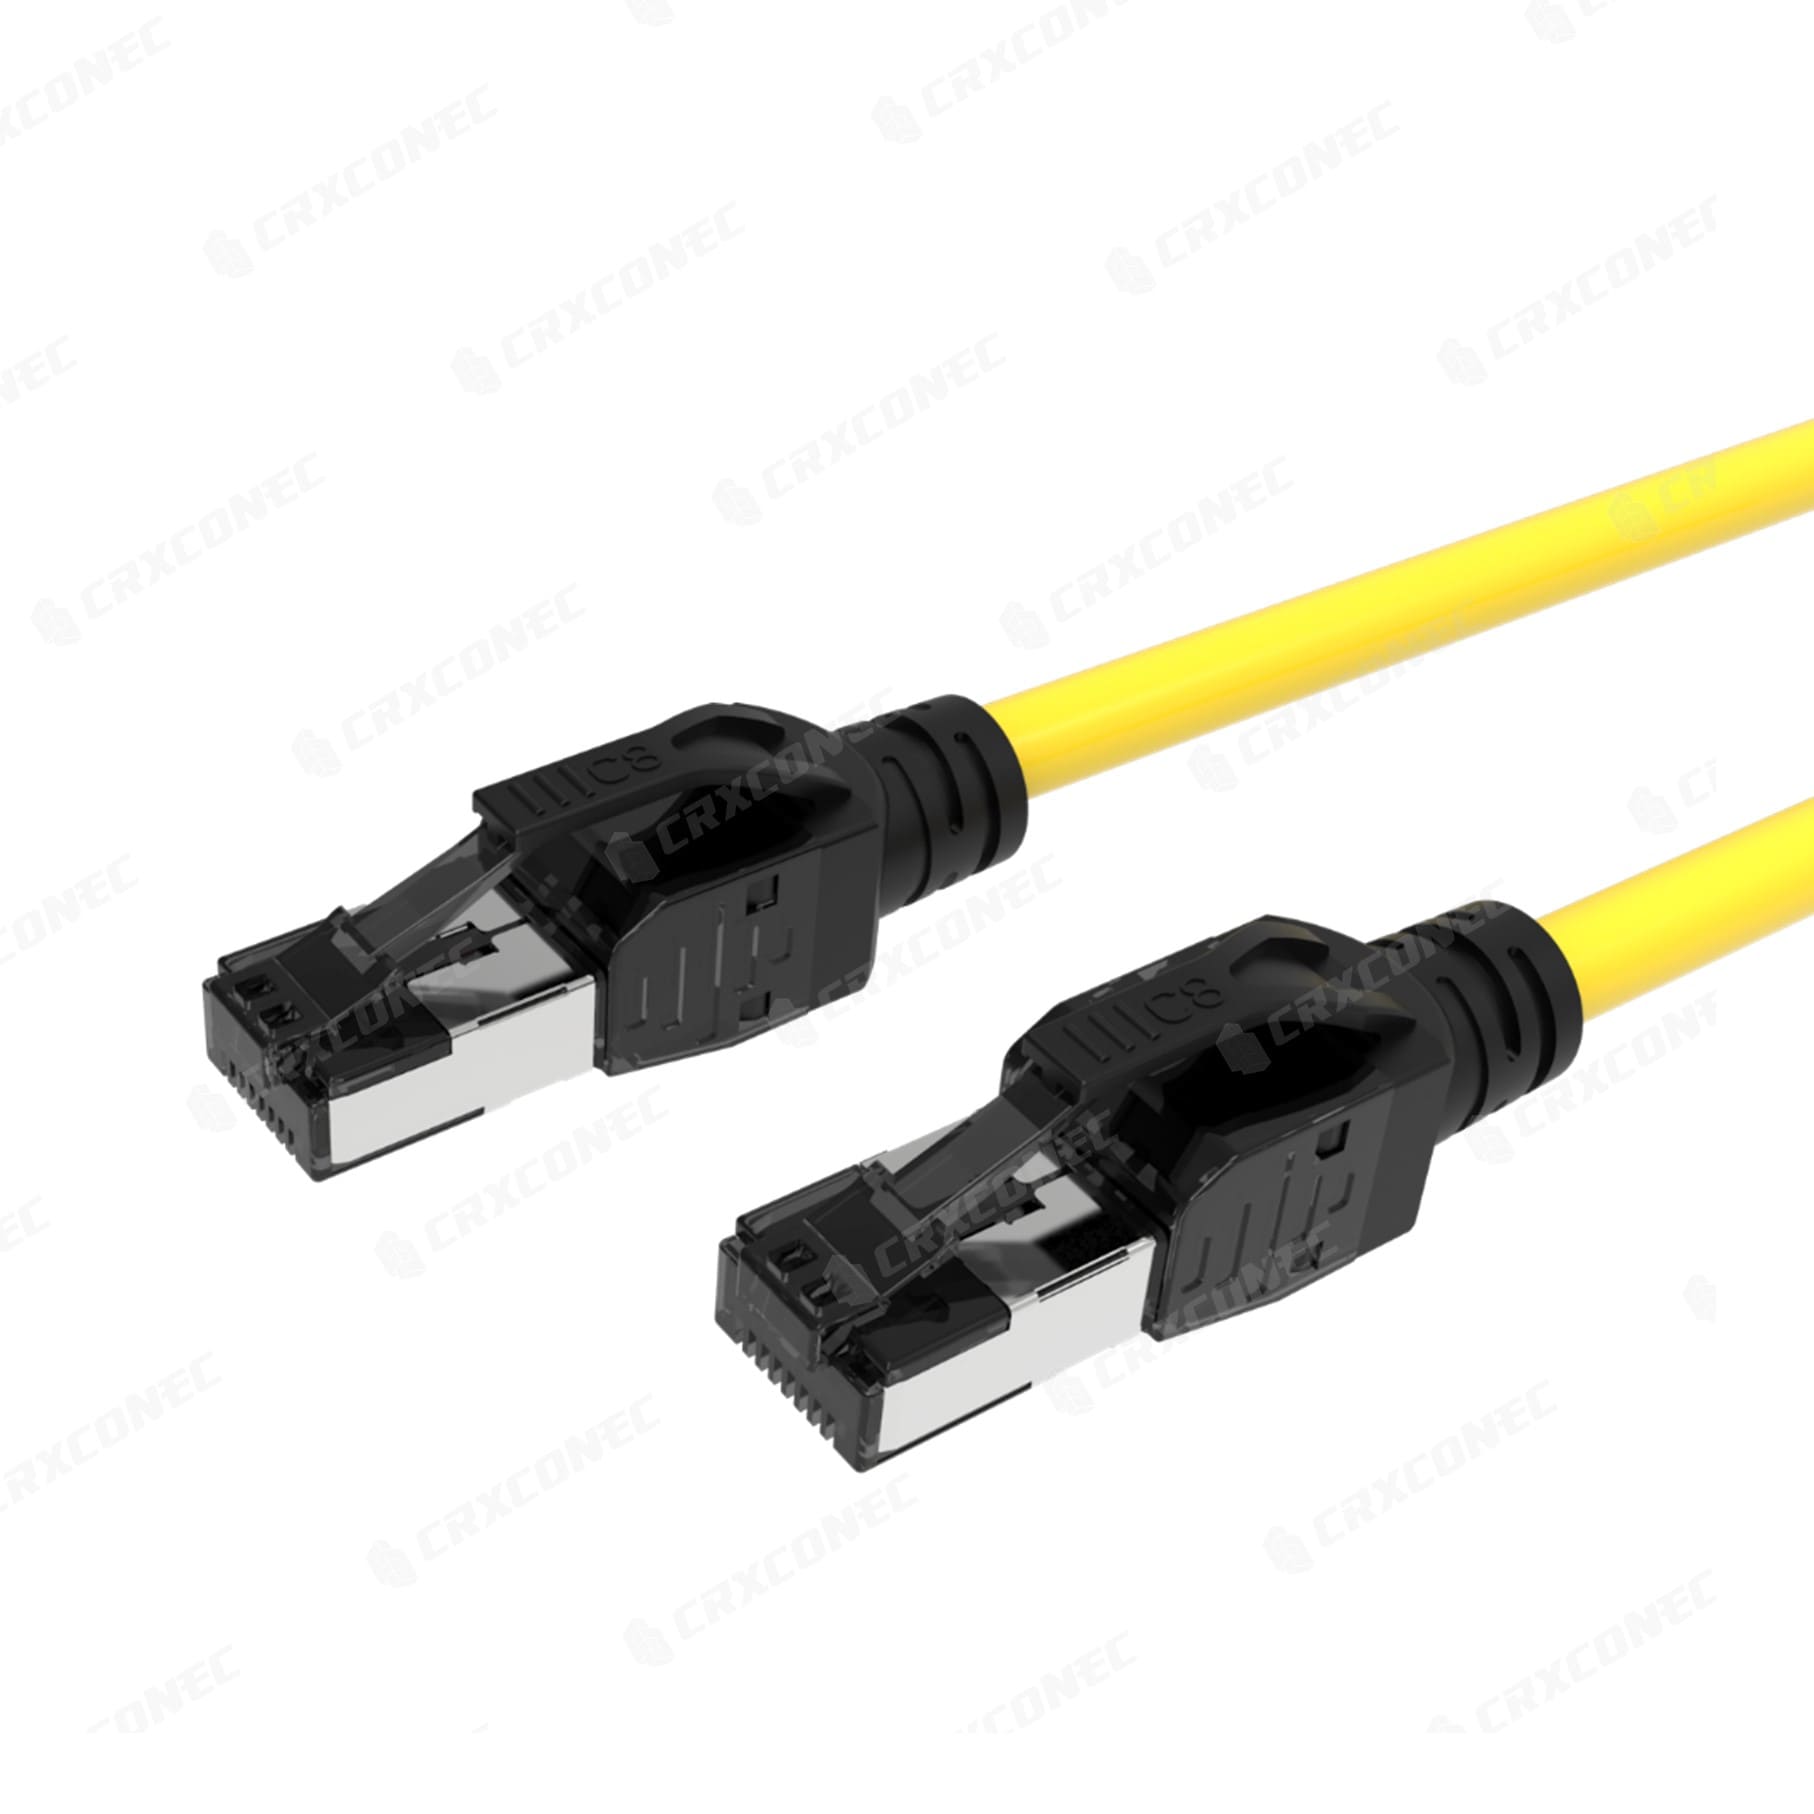 Cat8 Cabling Solution High Bandwidth Cat8 Patch Cables